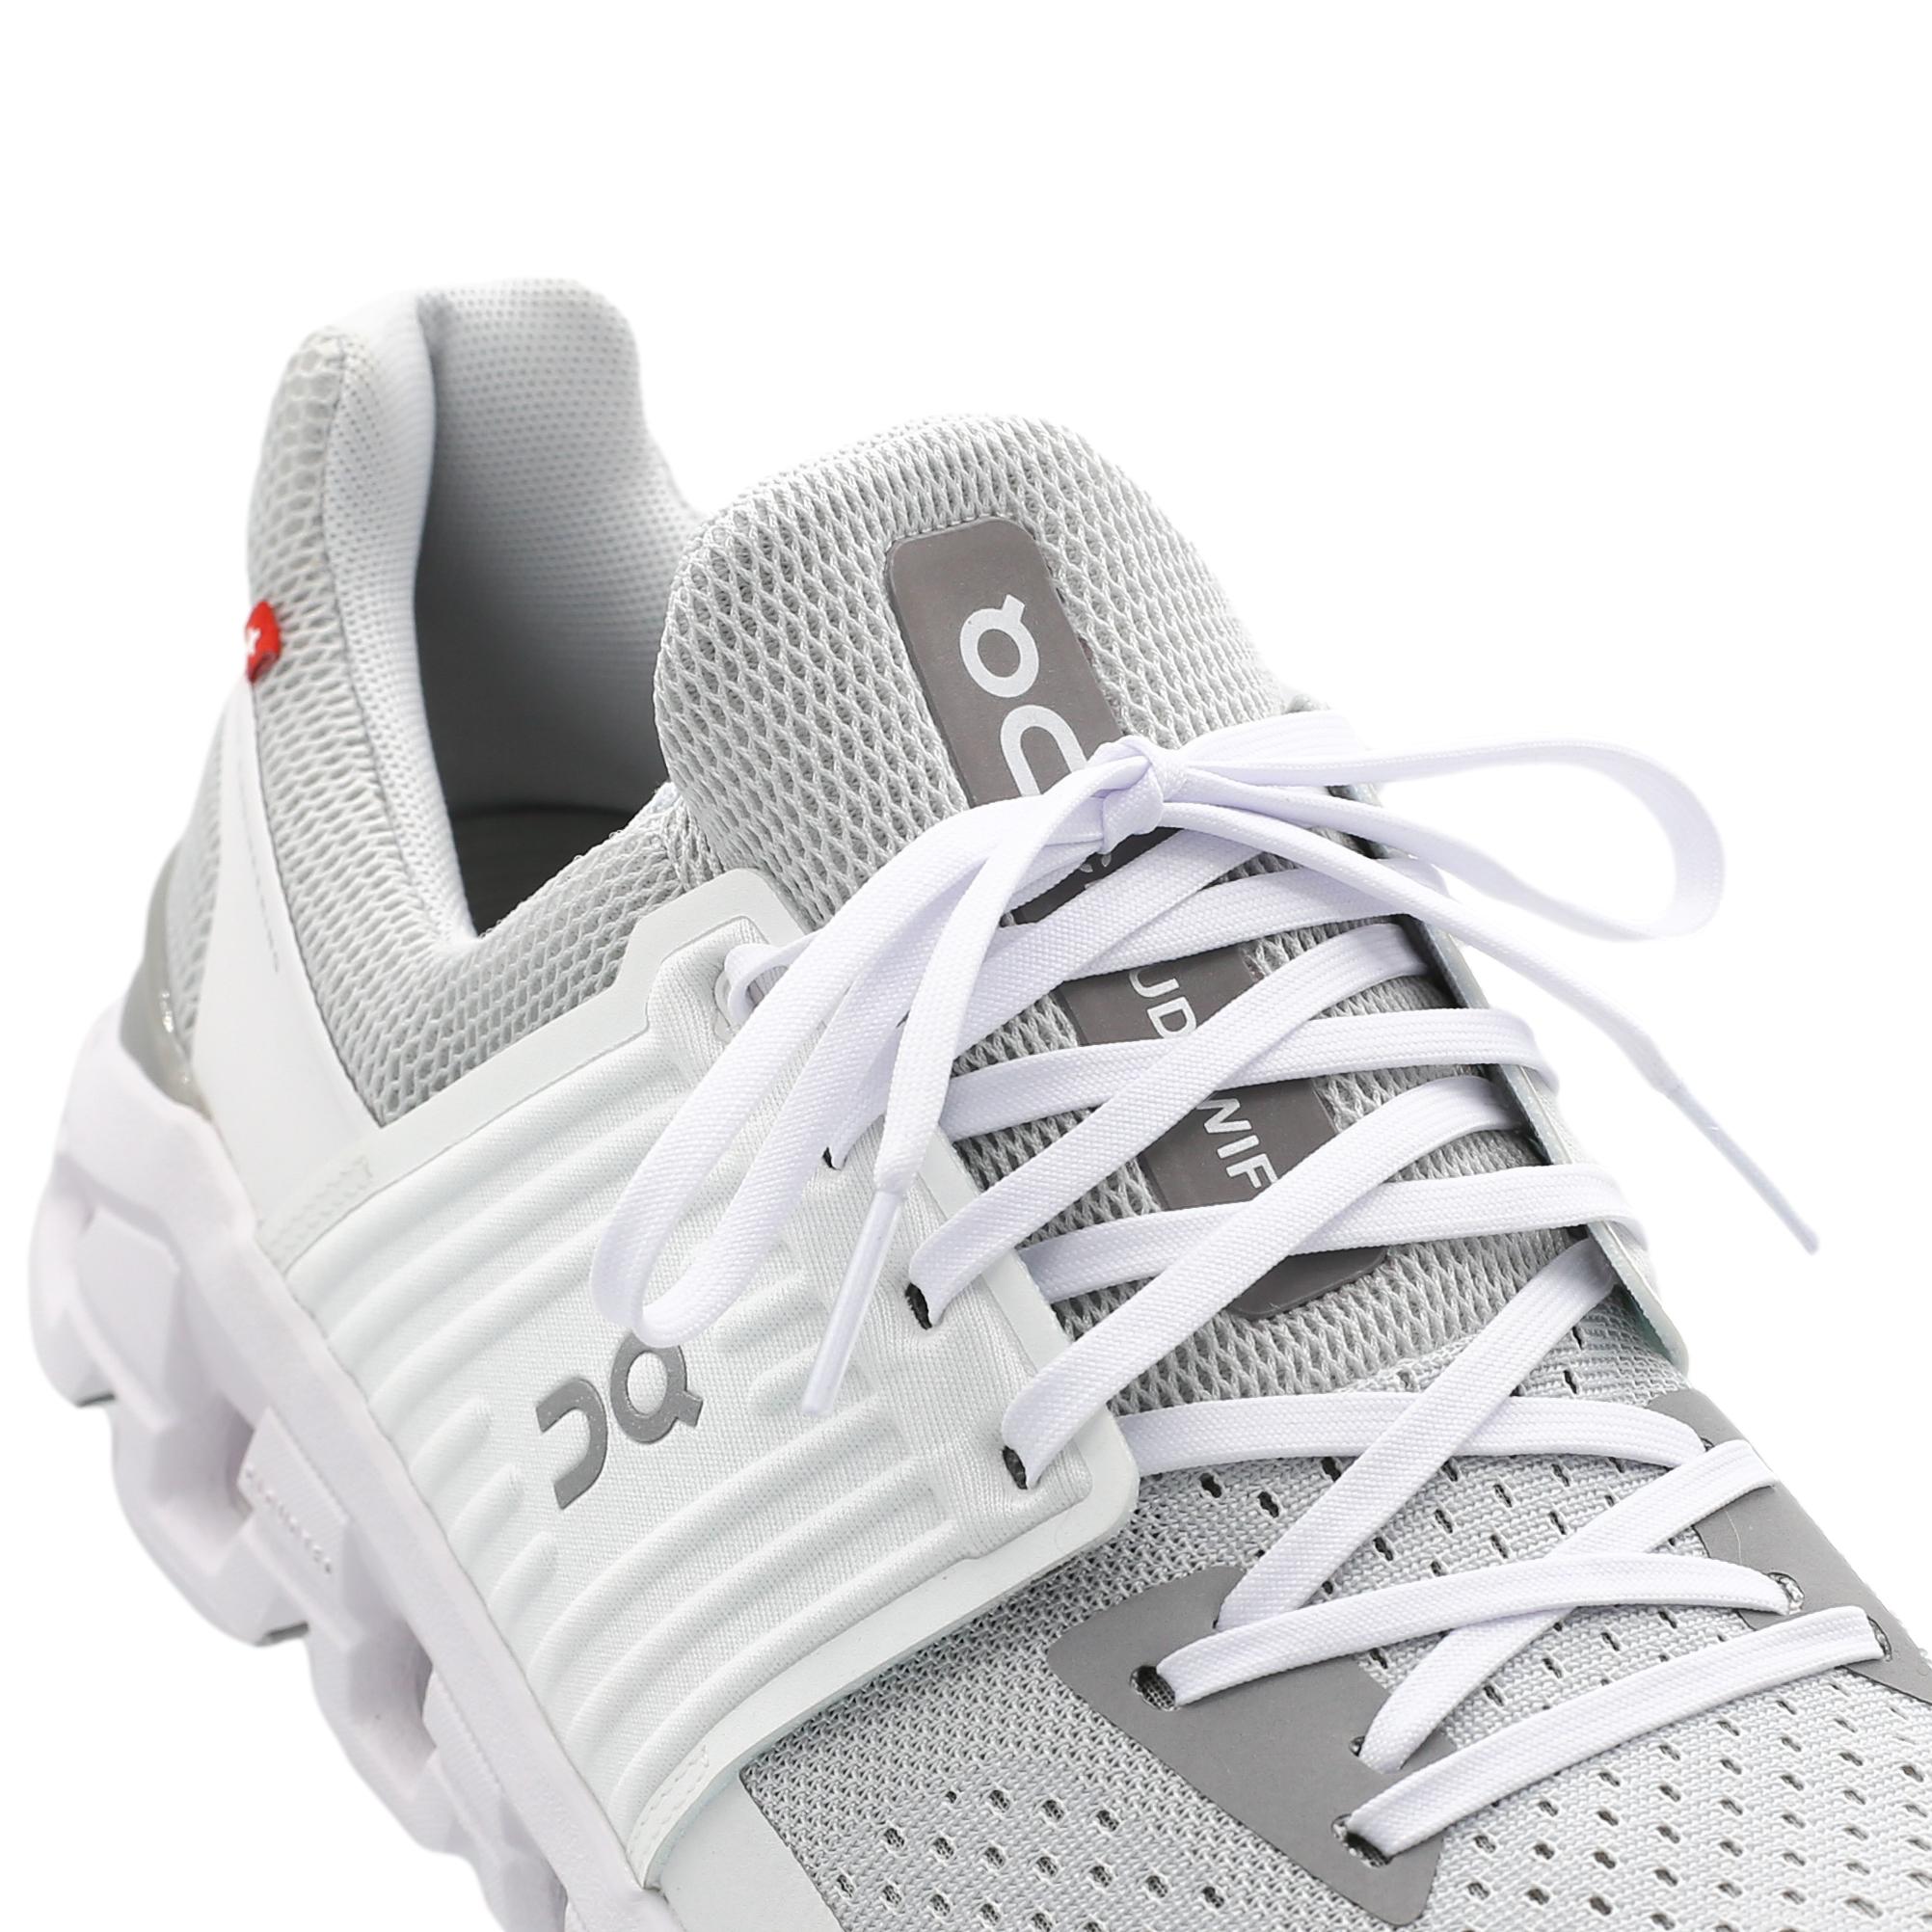 Quick Laces  Running Shoelace